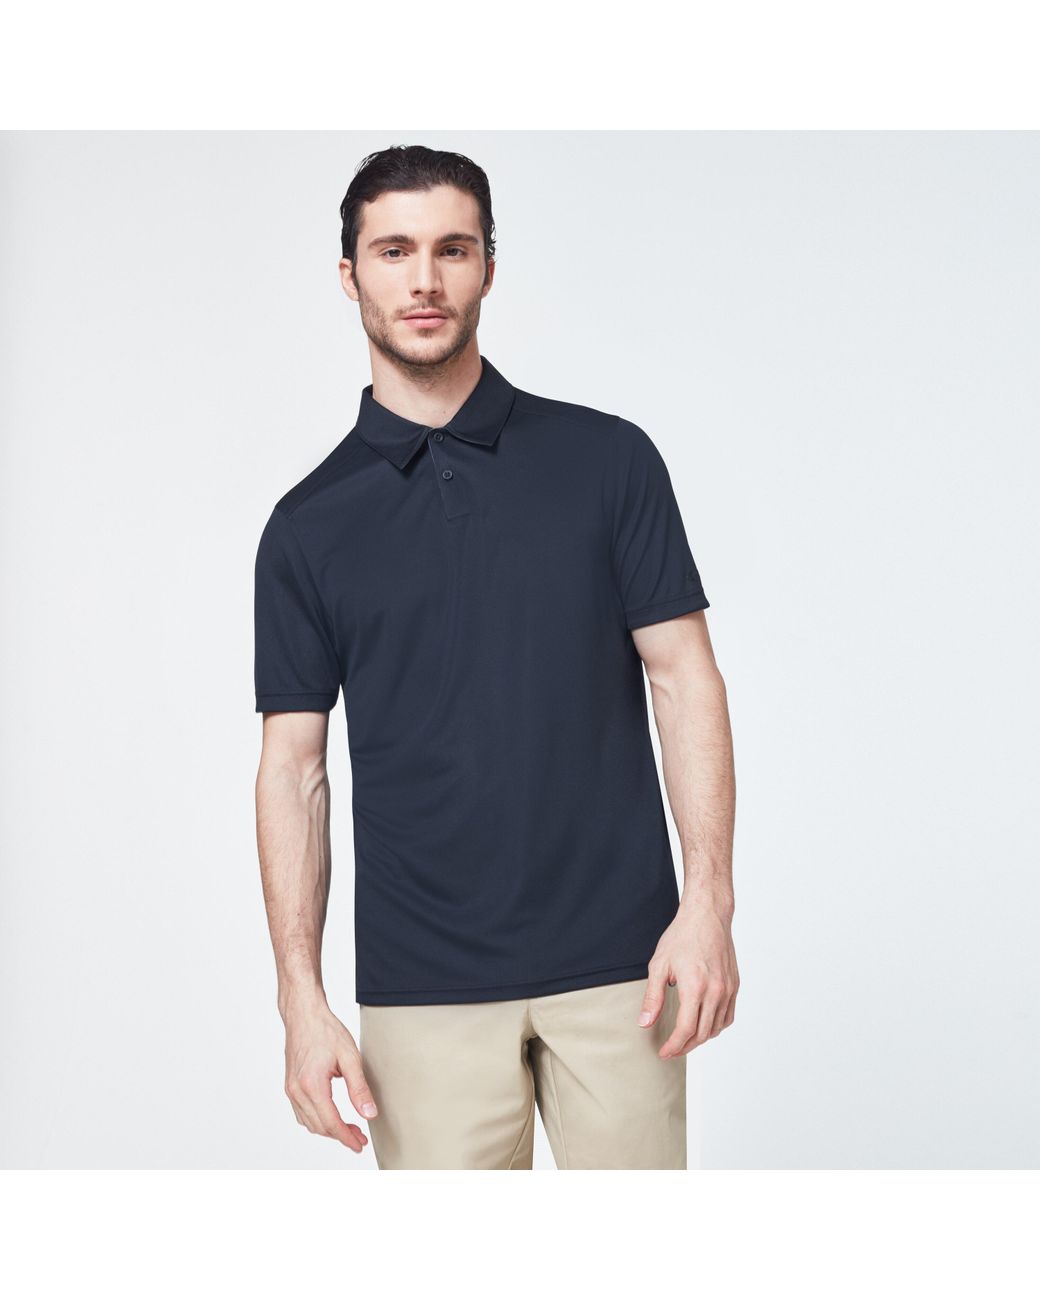 Oakley Divisional Polo 2.0 in Black for Men - Lyst